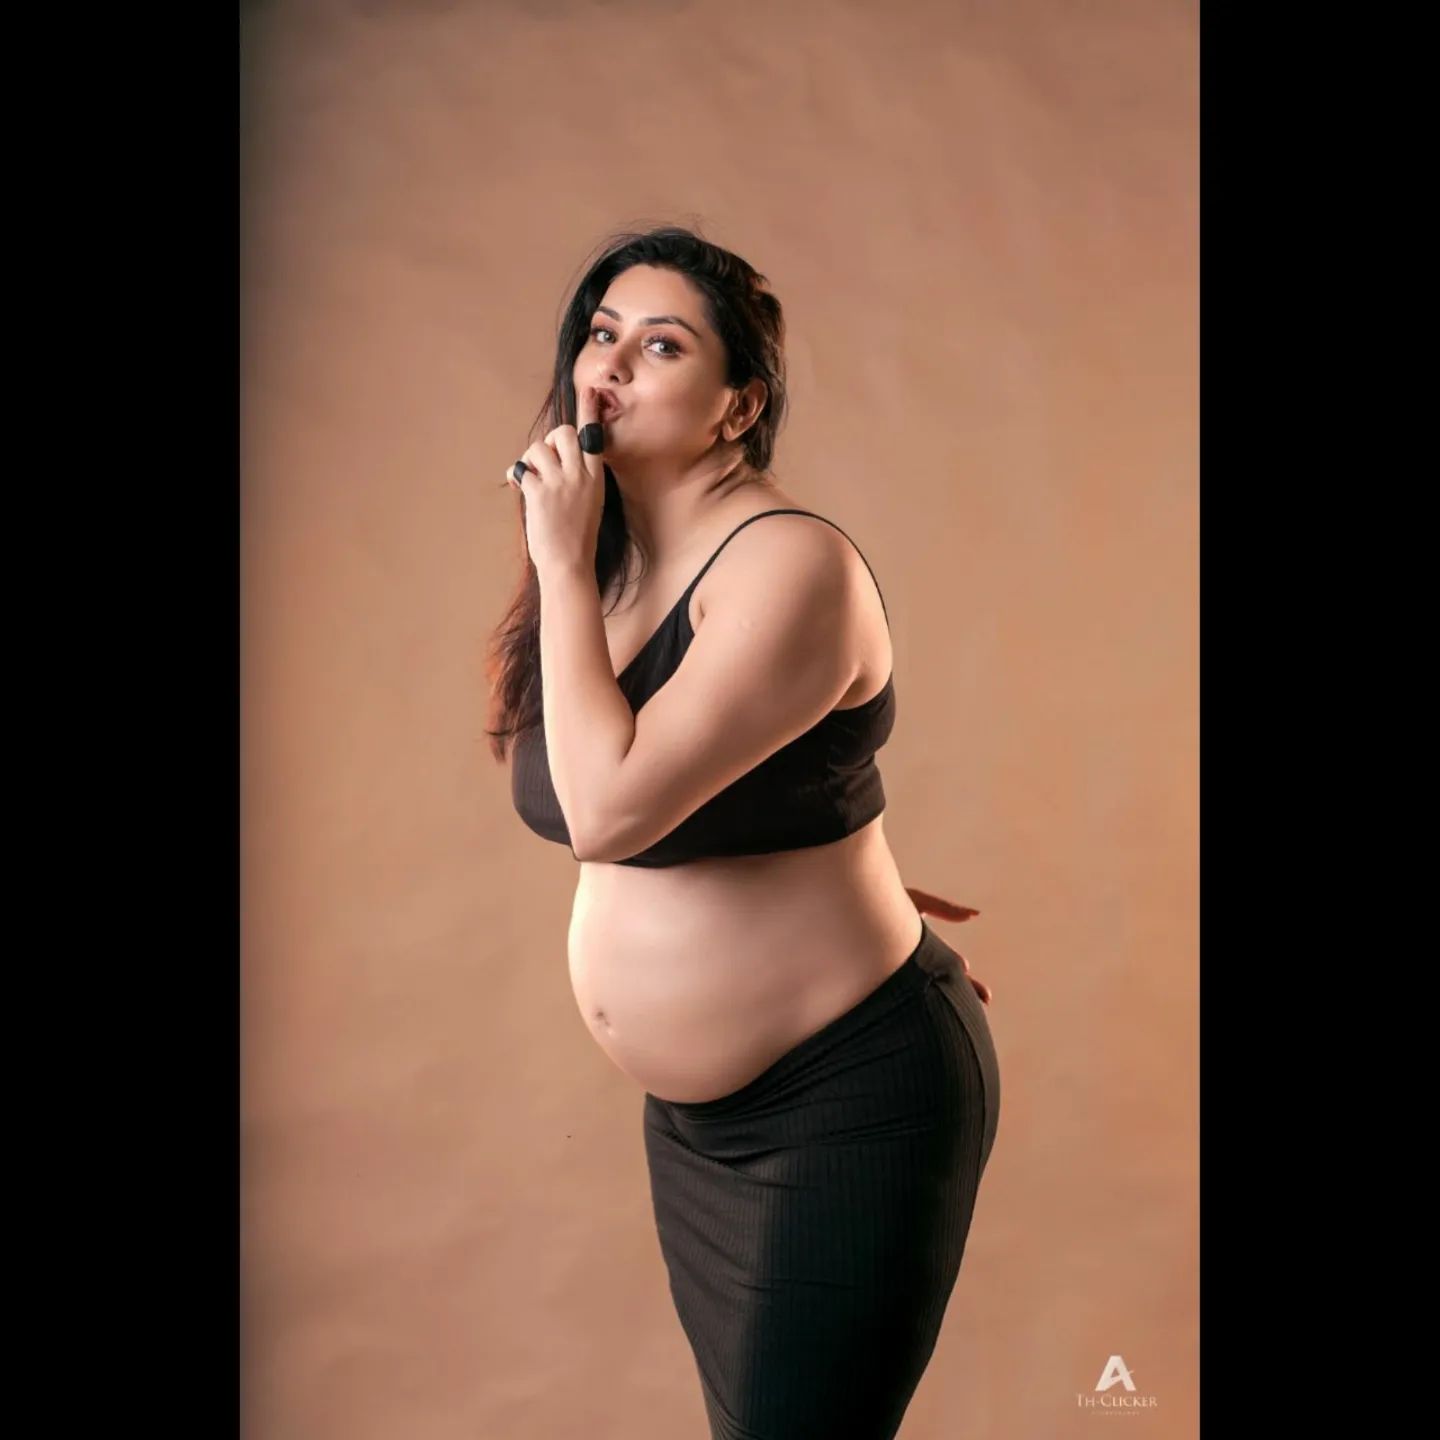 Actress namitha announced her pregnancy by sharing photos